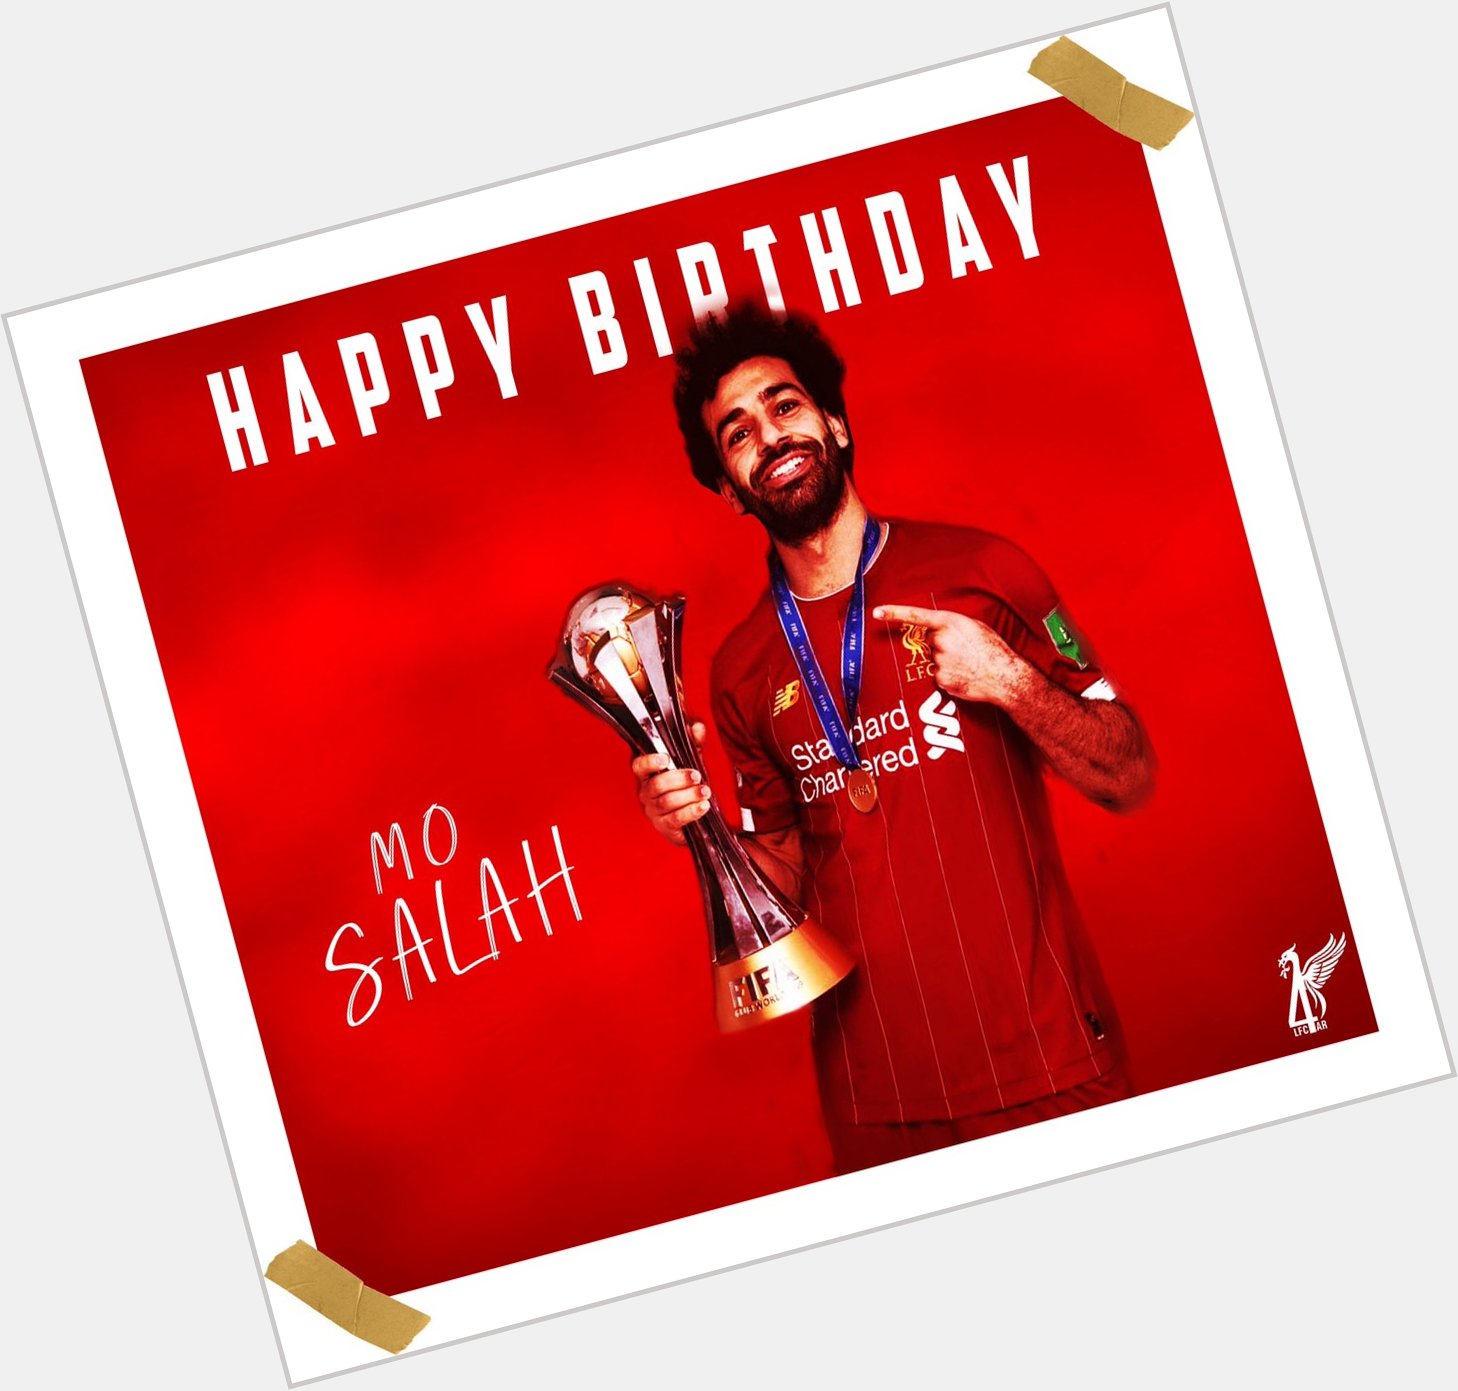  Happy birthday to Egyptian King Mohamed Salah who is celebrating his 28th year!     